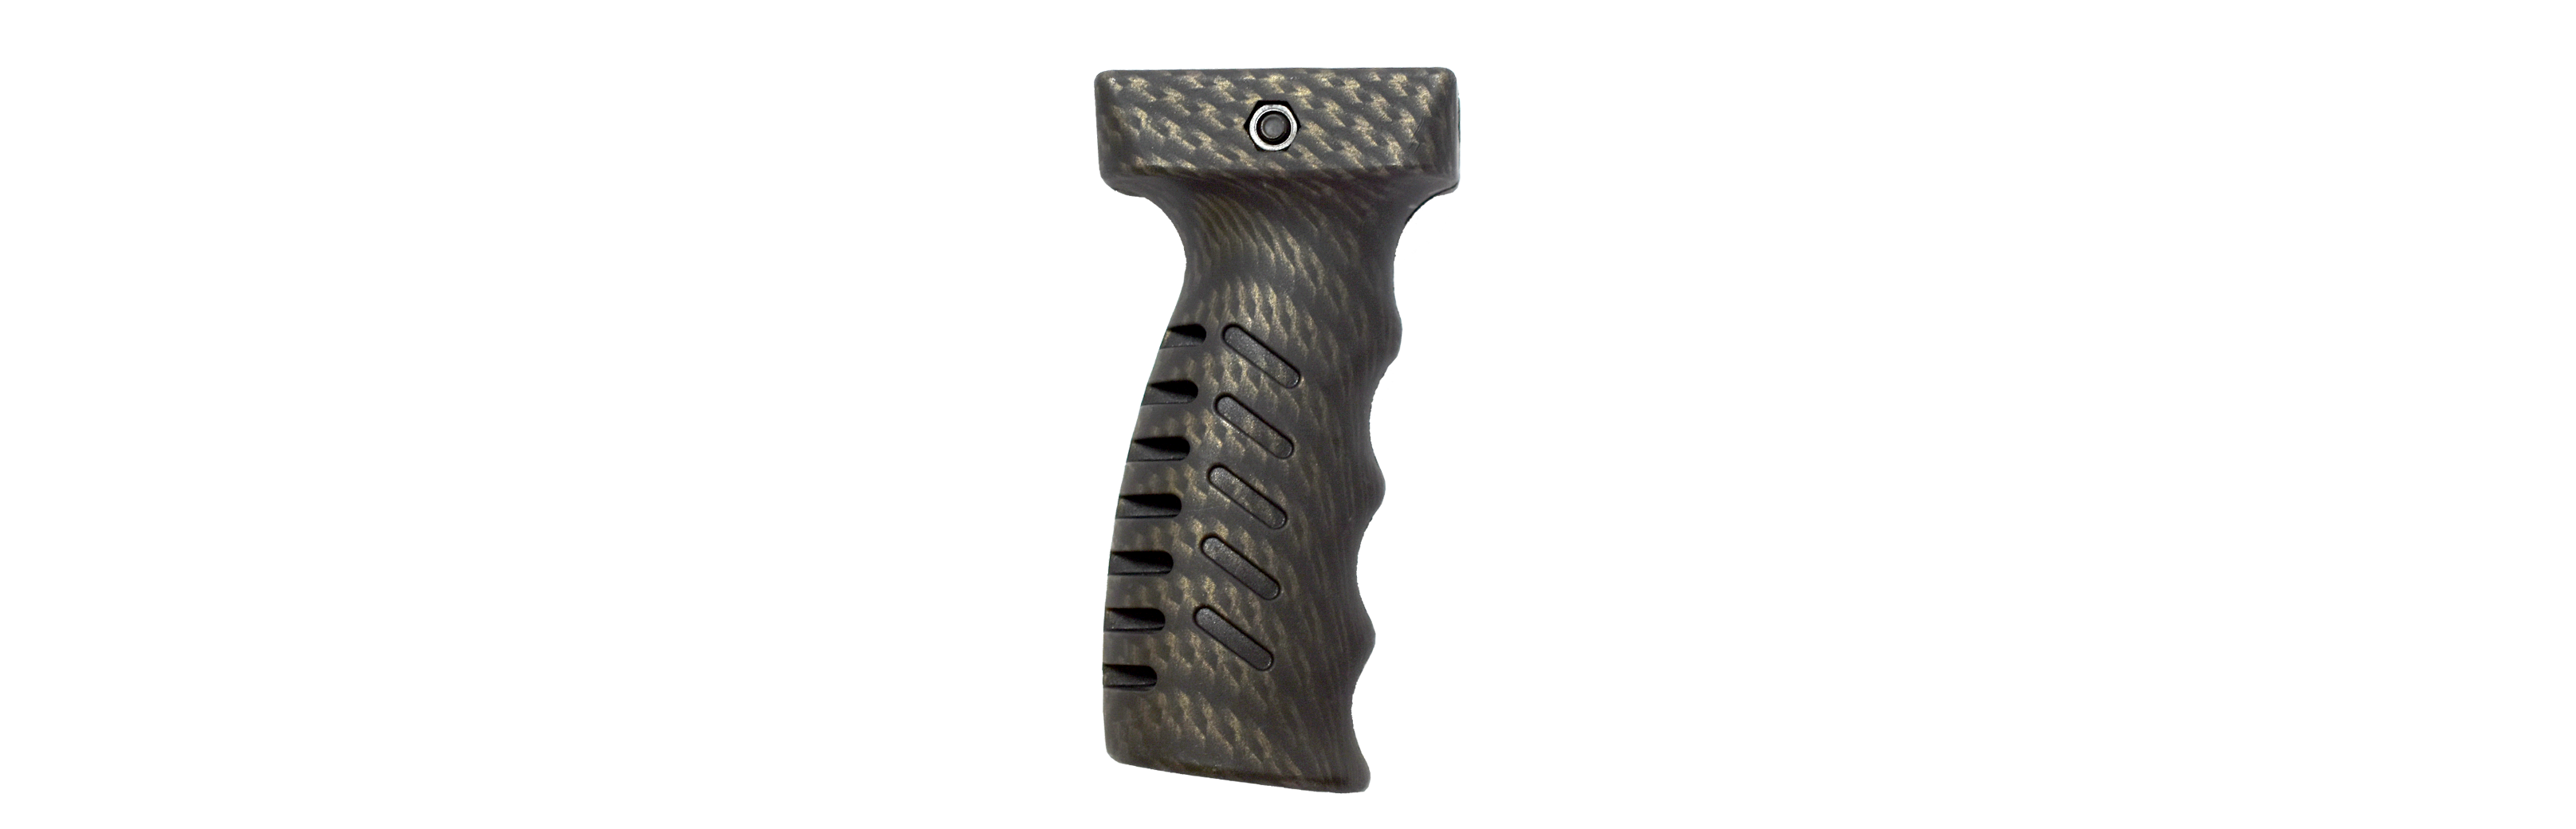 /archive/product/item/images/ARStyleForeGrip/AR-Style-Fore-Grip-1.png